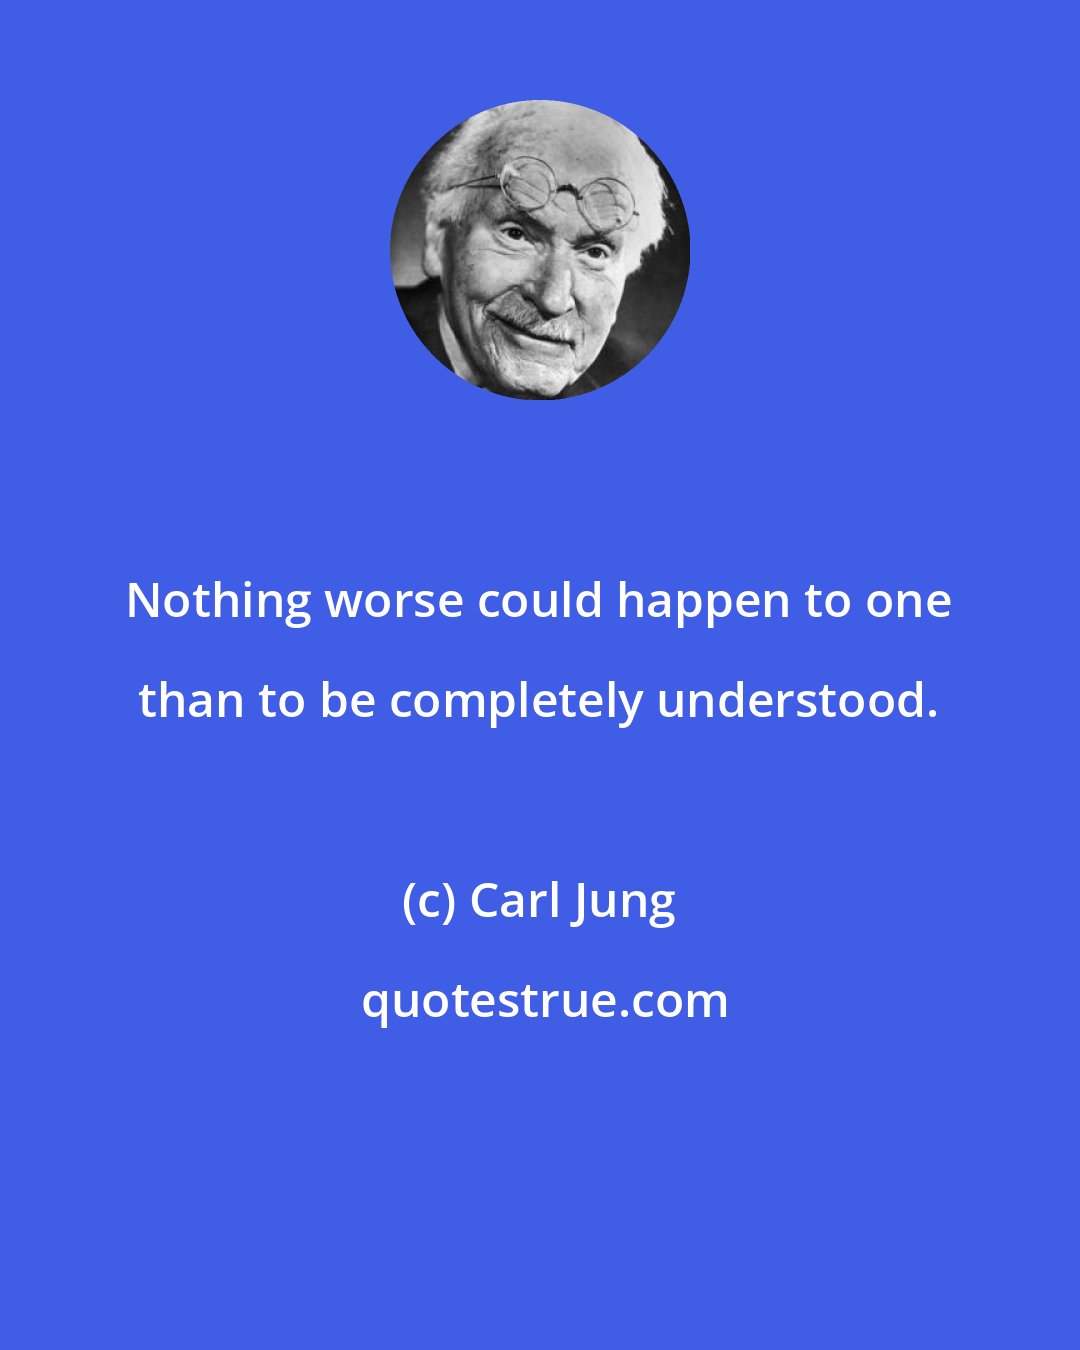 Carl Jung: Nothing worse could happen to one than to be completely understood.